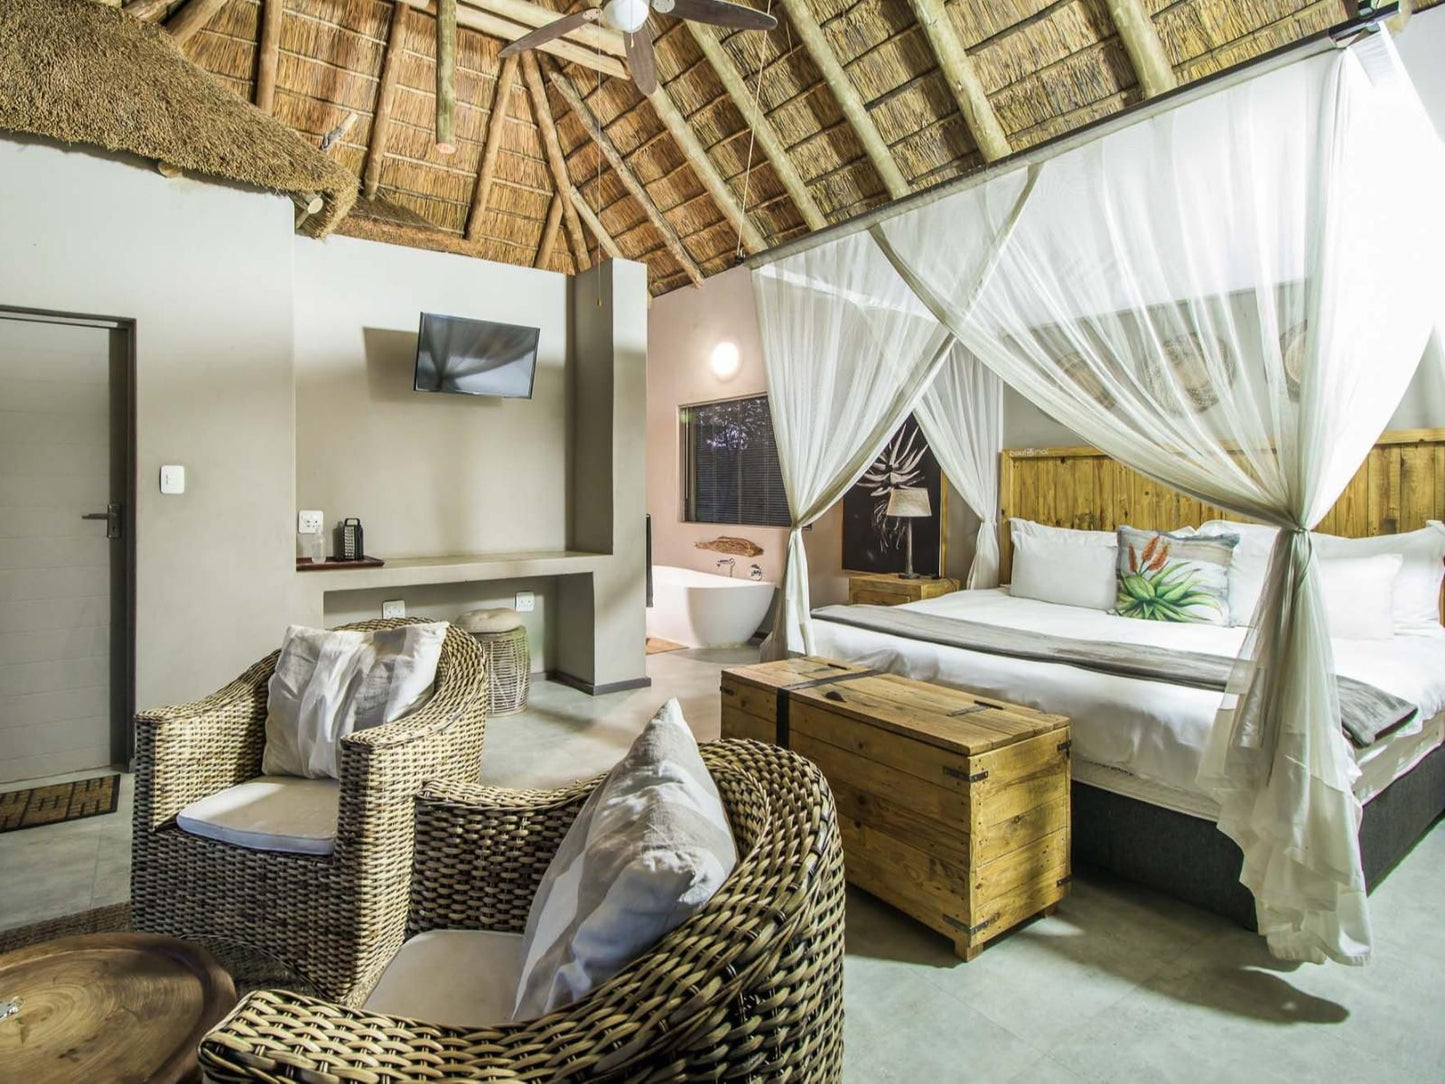 Lookoutsafarilodge The Heartbeat Of Africa Dinokeng Game Reserve Gauteng South Africa Bedroom